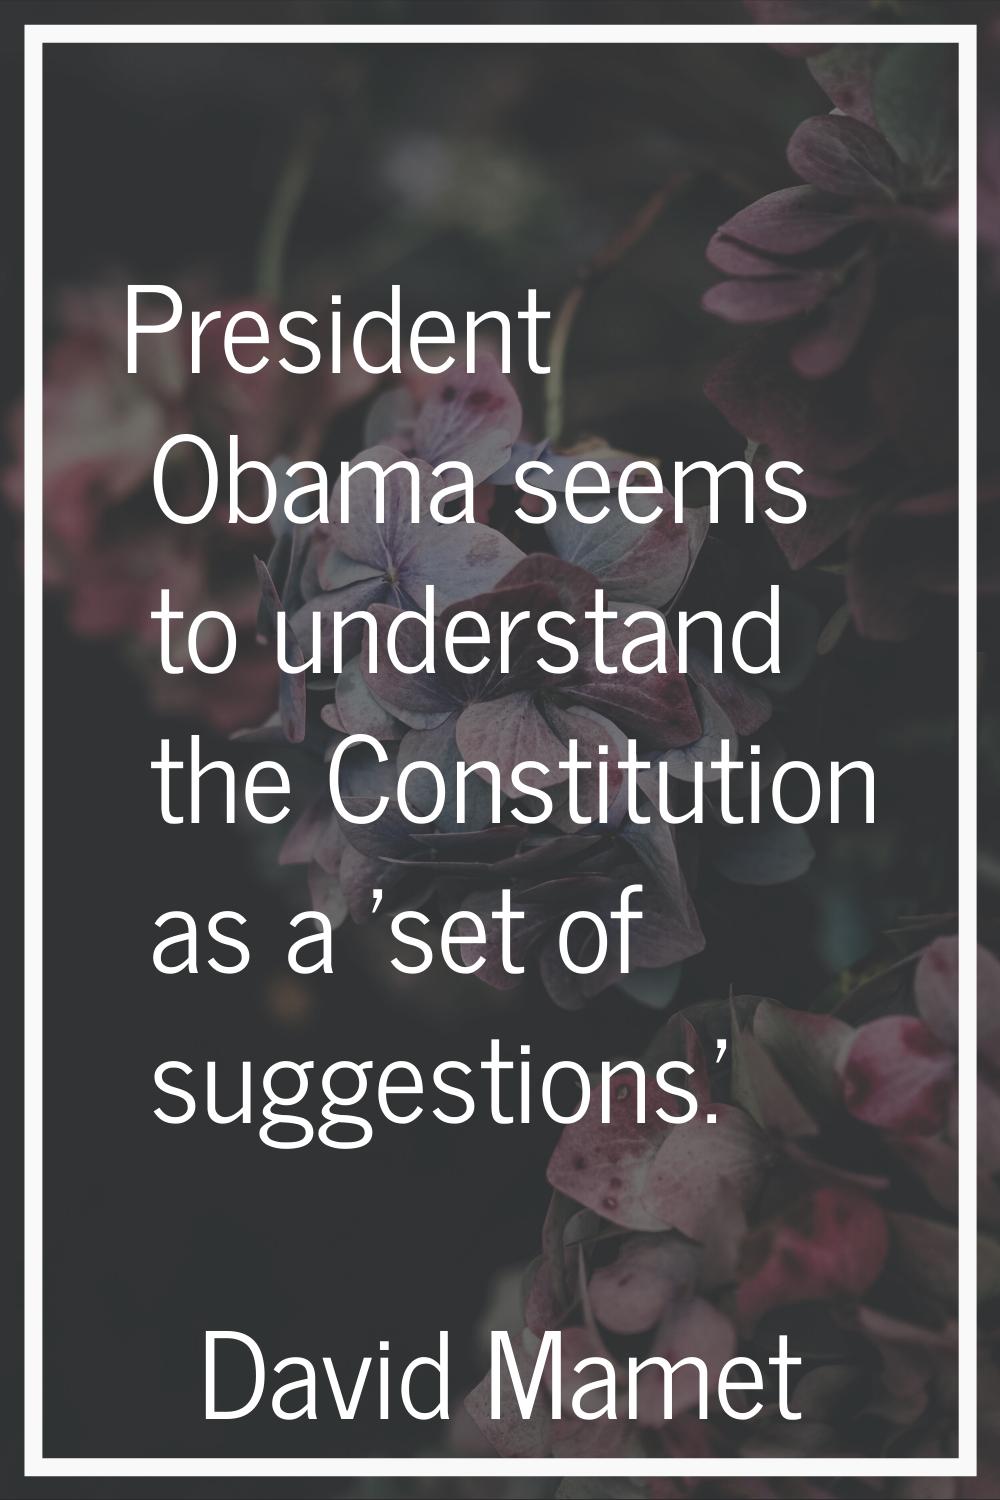 President Obama seems to understand the Constitution as a 'set of suggestions.'